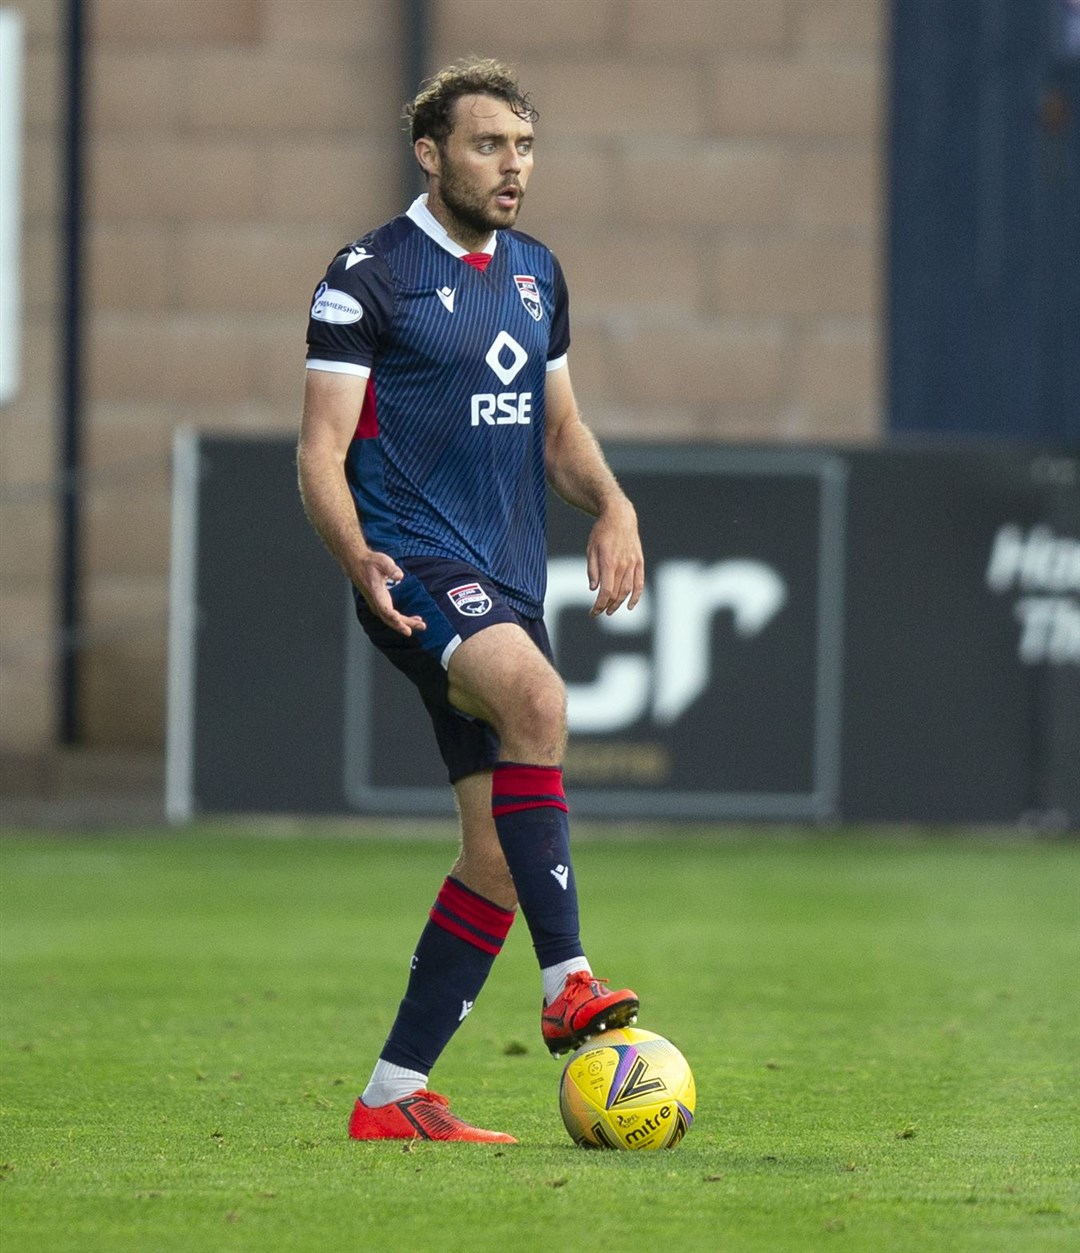 Picture - Ken Macpherson, Inverness. Ross County(2) v Kilmarnock(2). 12.08.20. Ross County's Connor Randall.